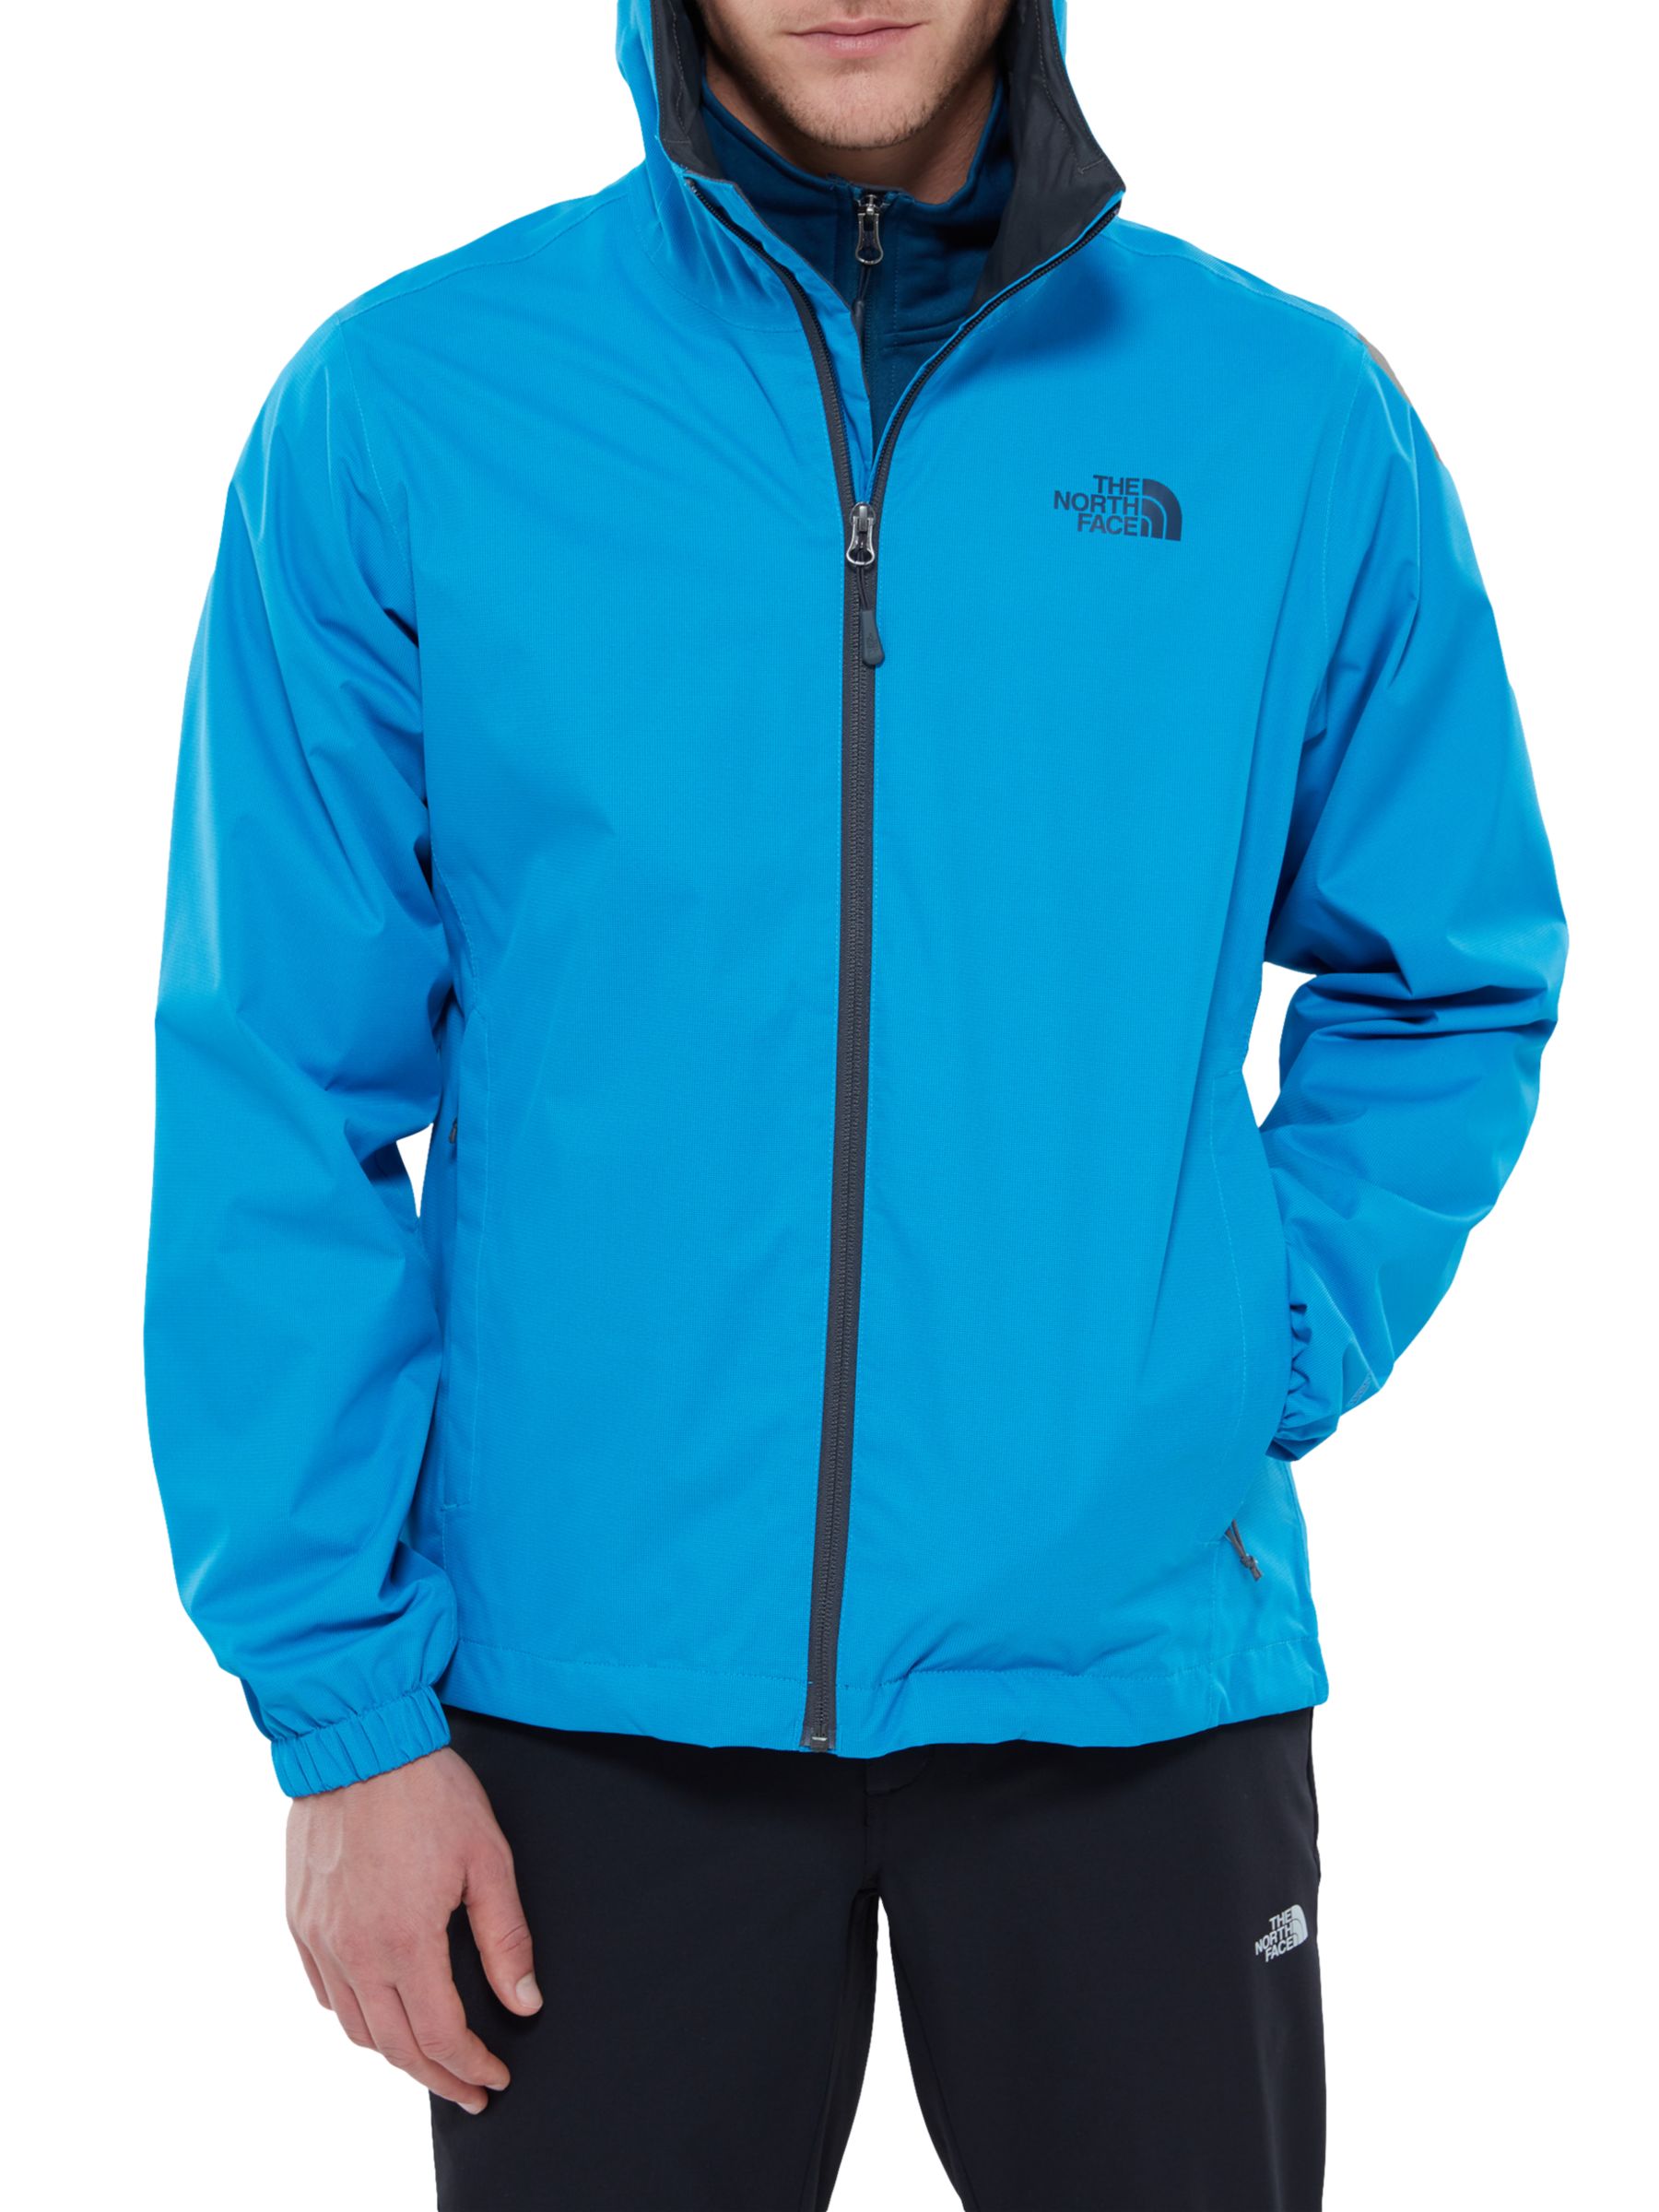 The North Face Quest Men's Waterproof 